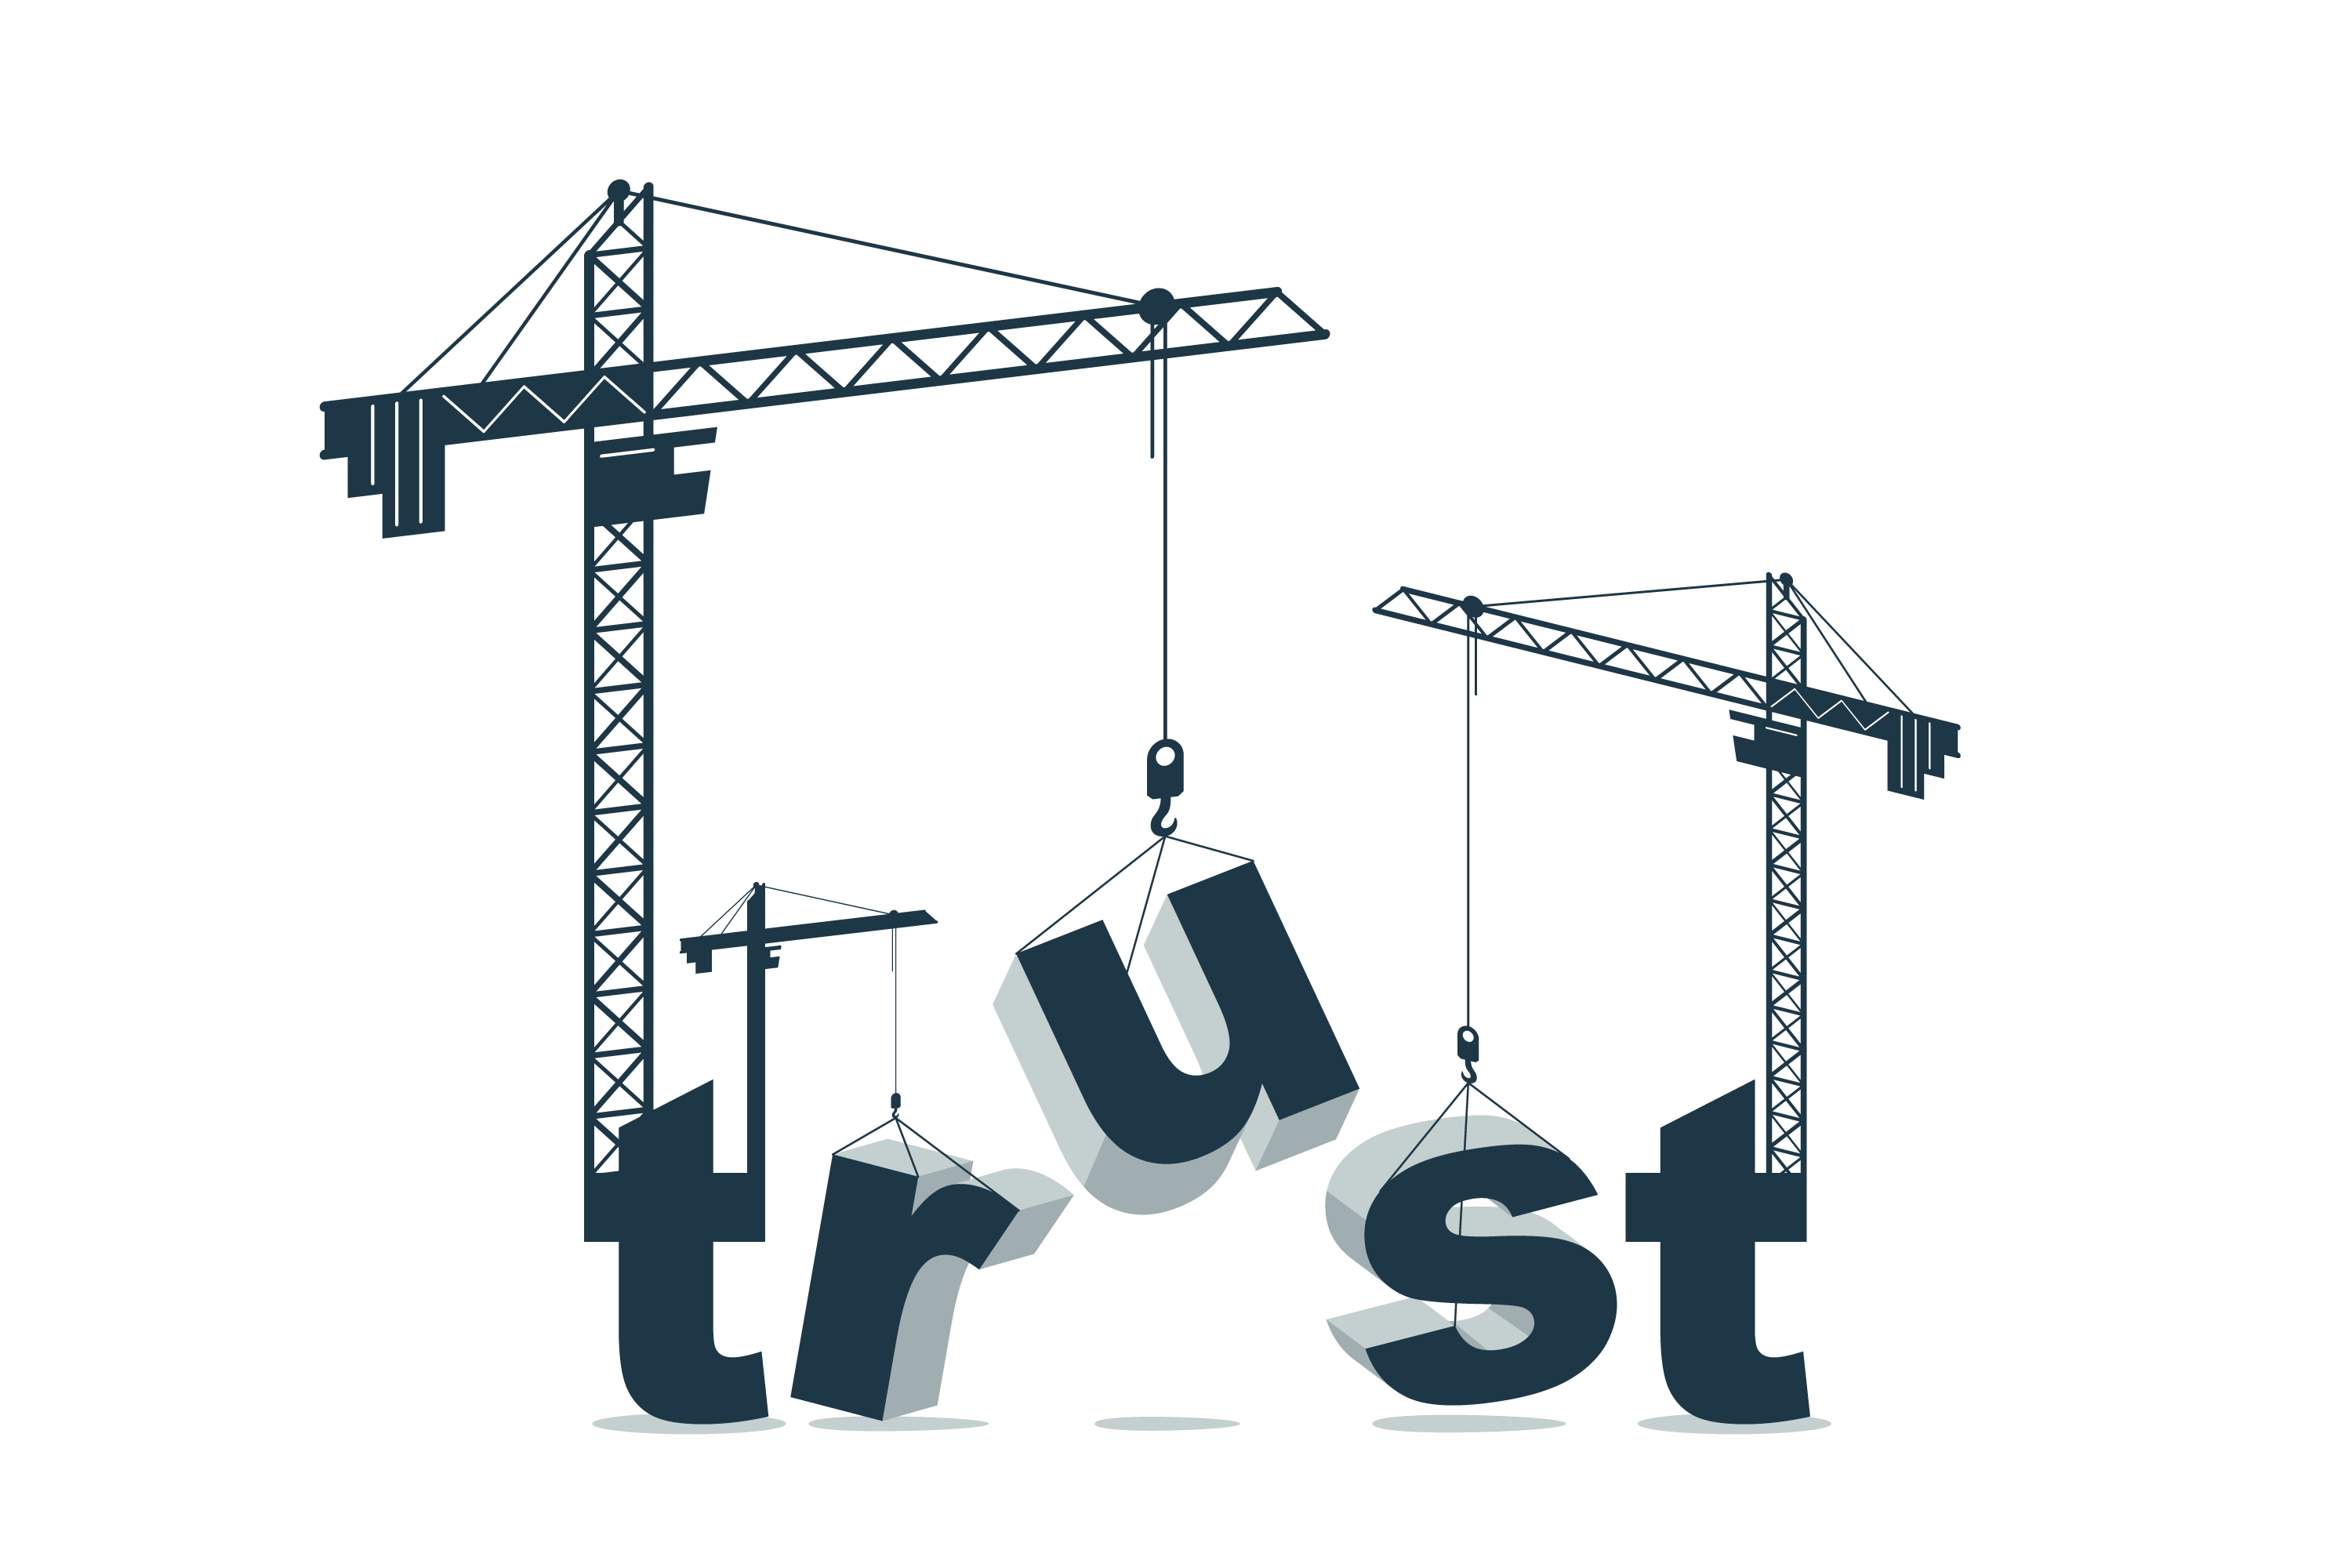 Building trust to achieve maximum potential: A 6-point framework for high performance at work